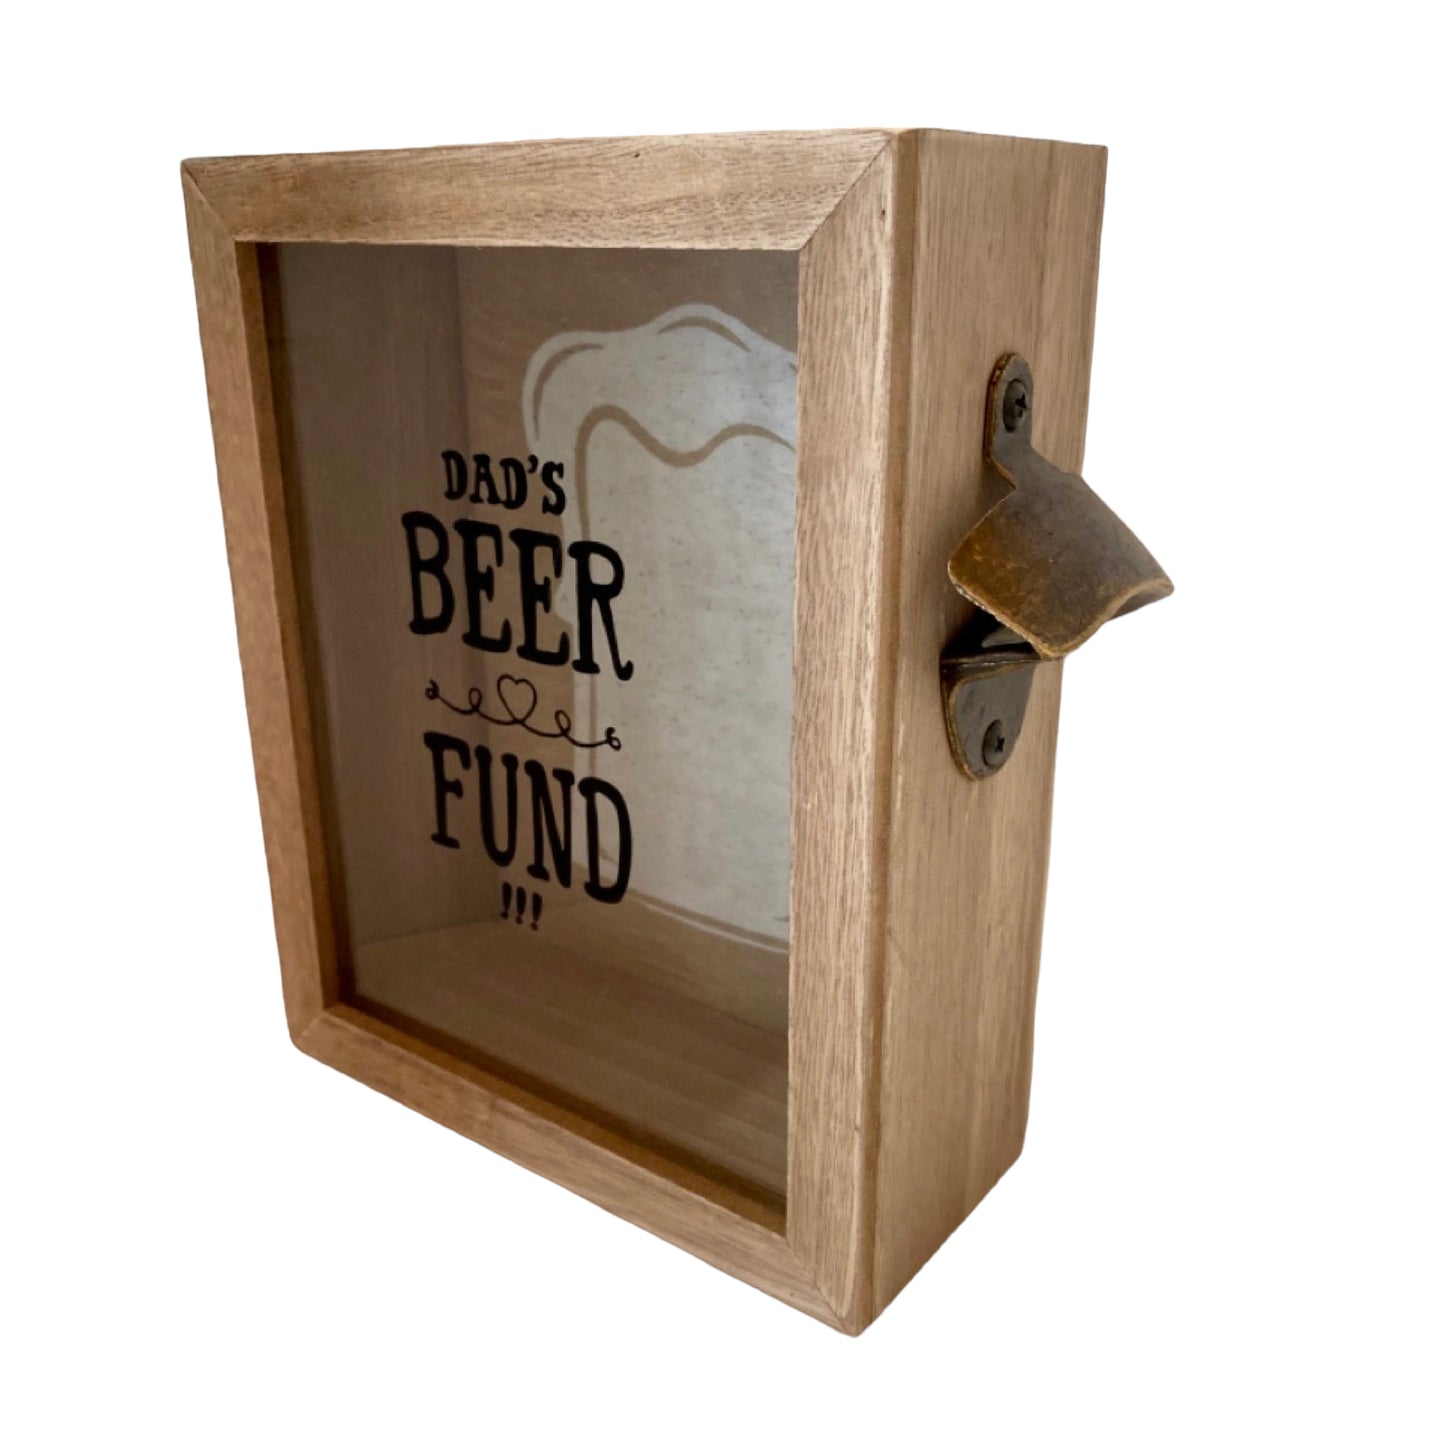 Money Box Dads Beer Fund Rustic with Bottle Opener - The Renmy Store Homewares & Gifts 